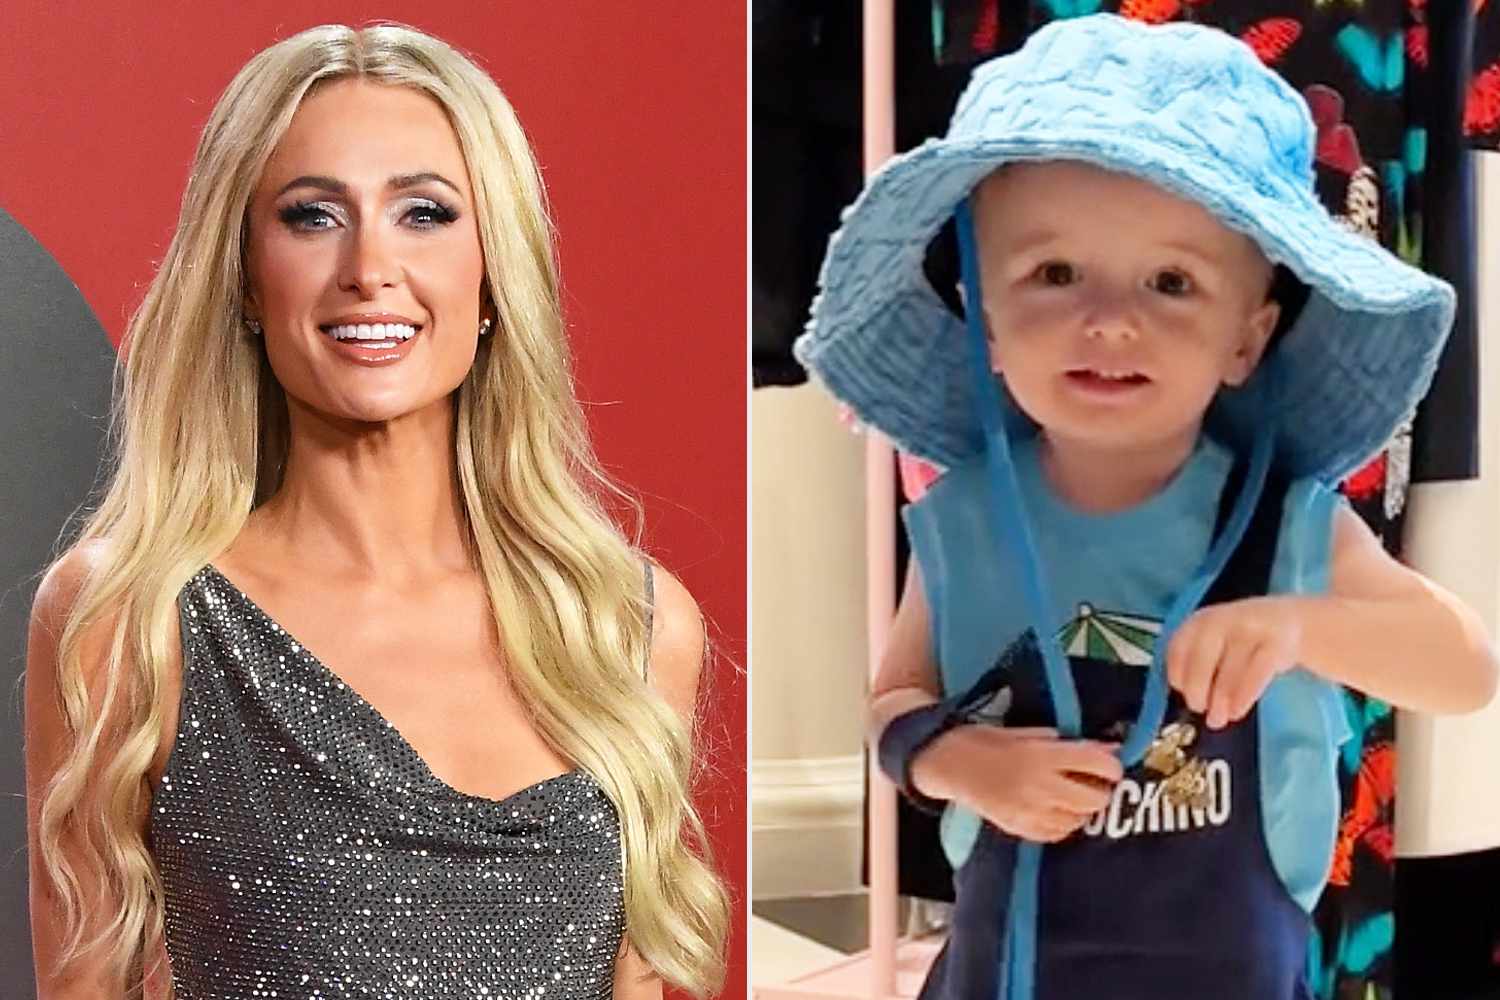 Paris Hilton Calls Son Phoenix a 'Lil Style Icon' as He Rocks Moschino Overalls and Versace Hat